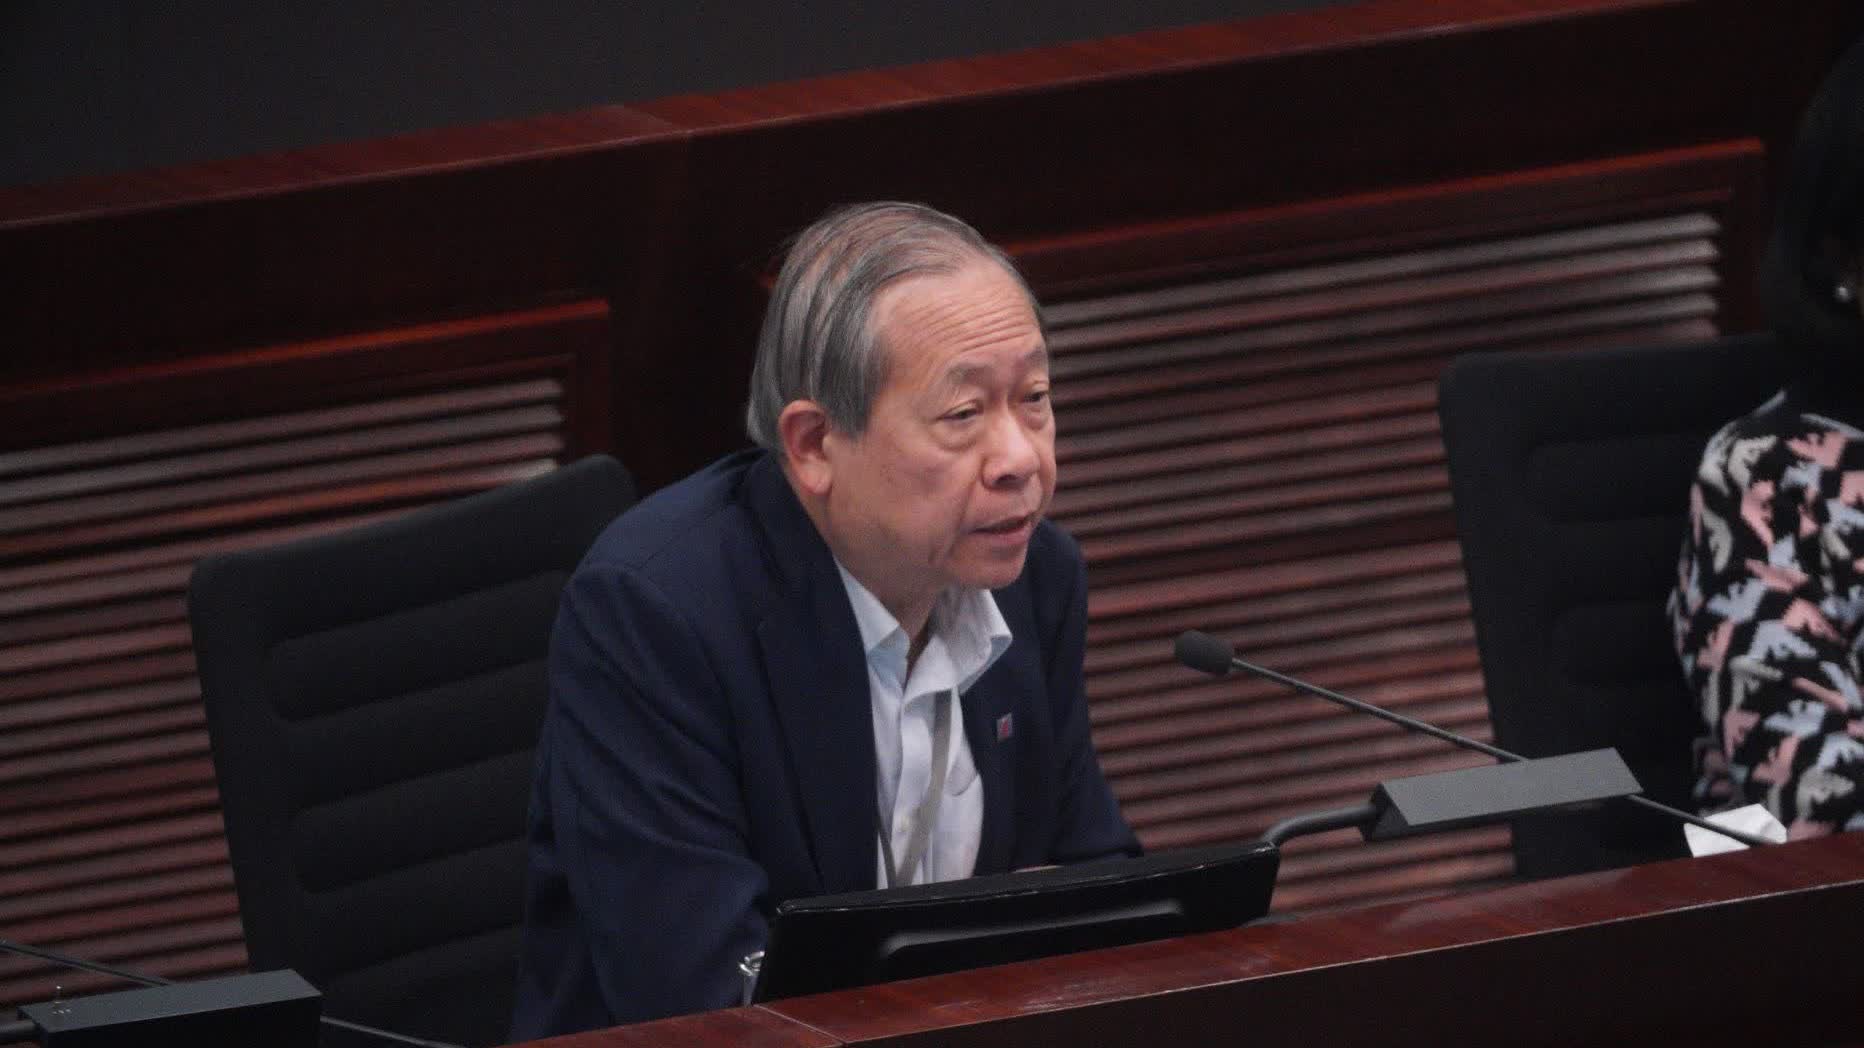 GBA outperforms HK in catering and retailing, LegCo Member says